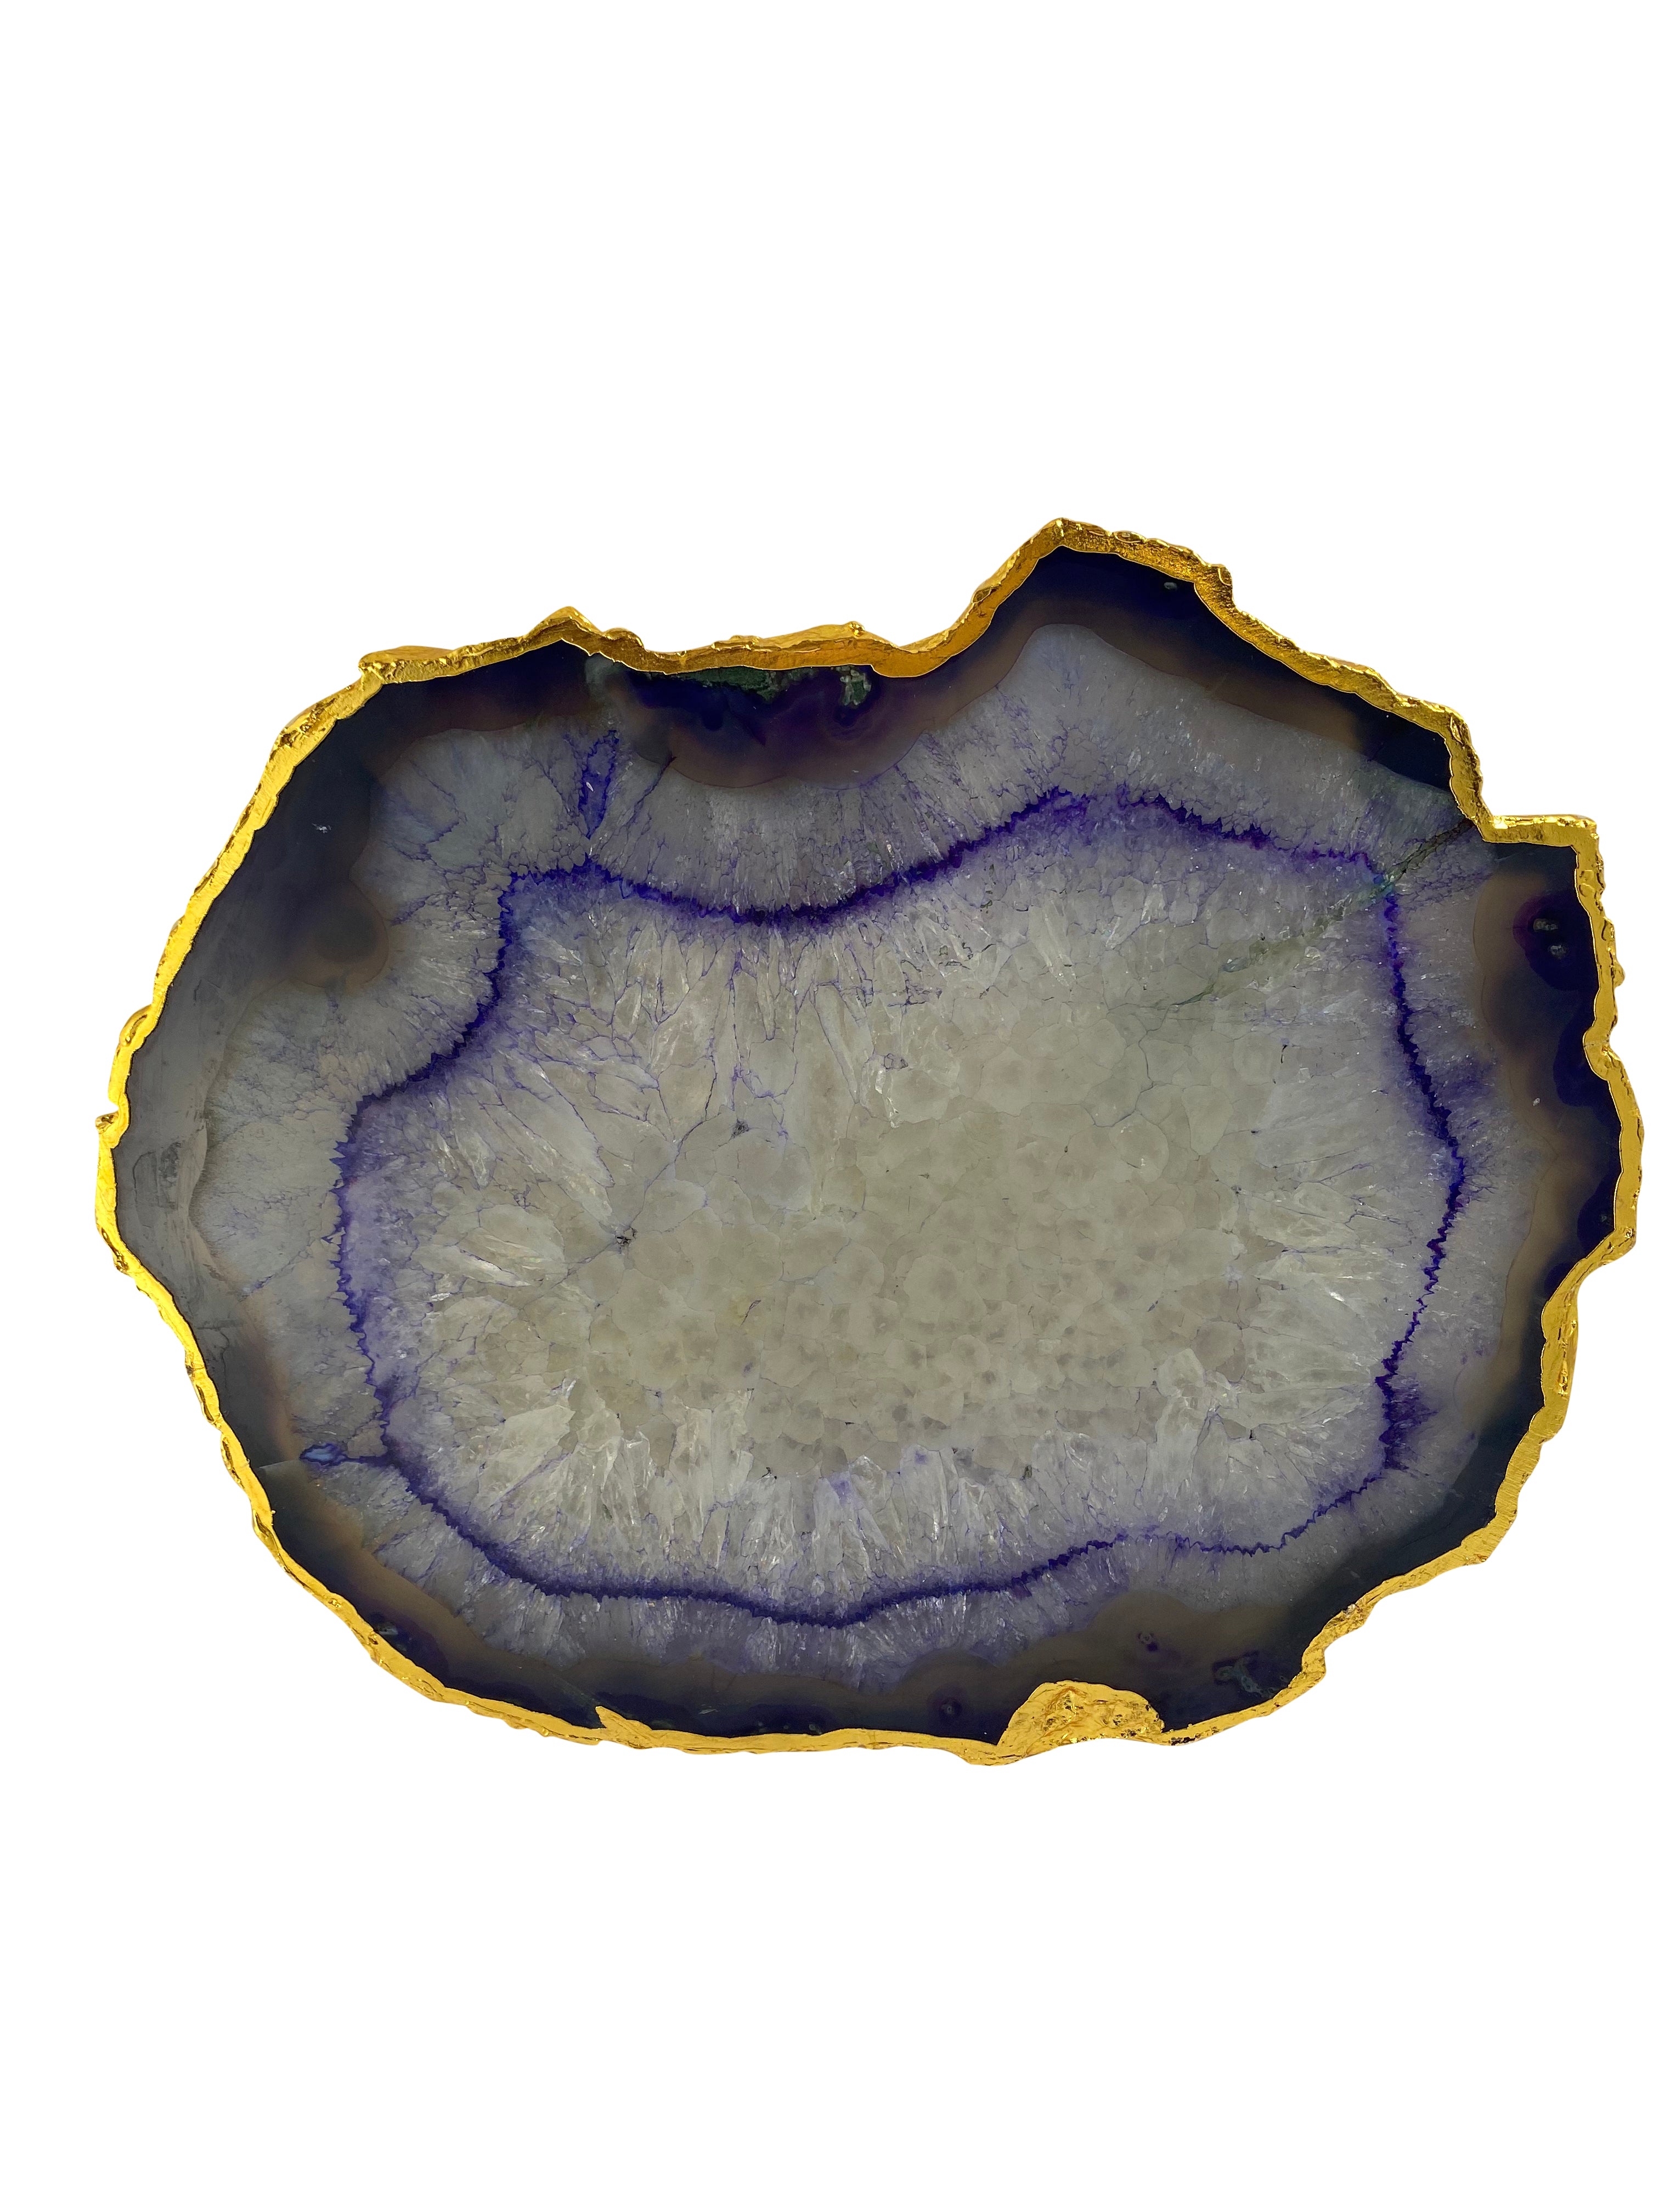 Purple Agate Crystal Plater A - 2KG